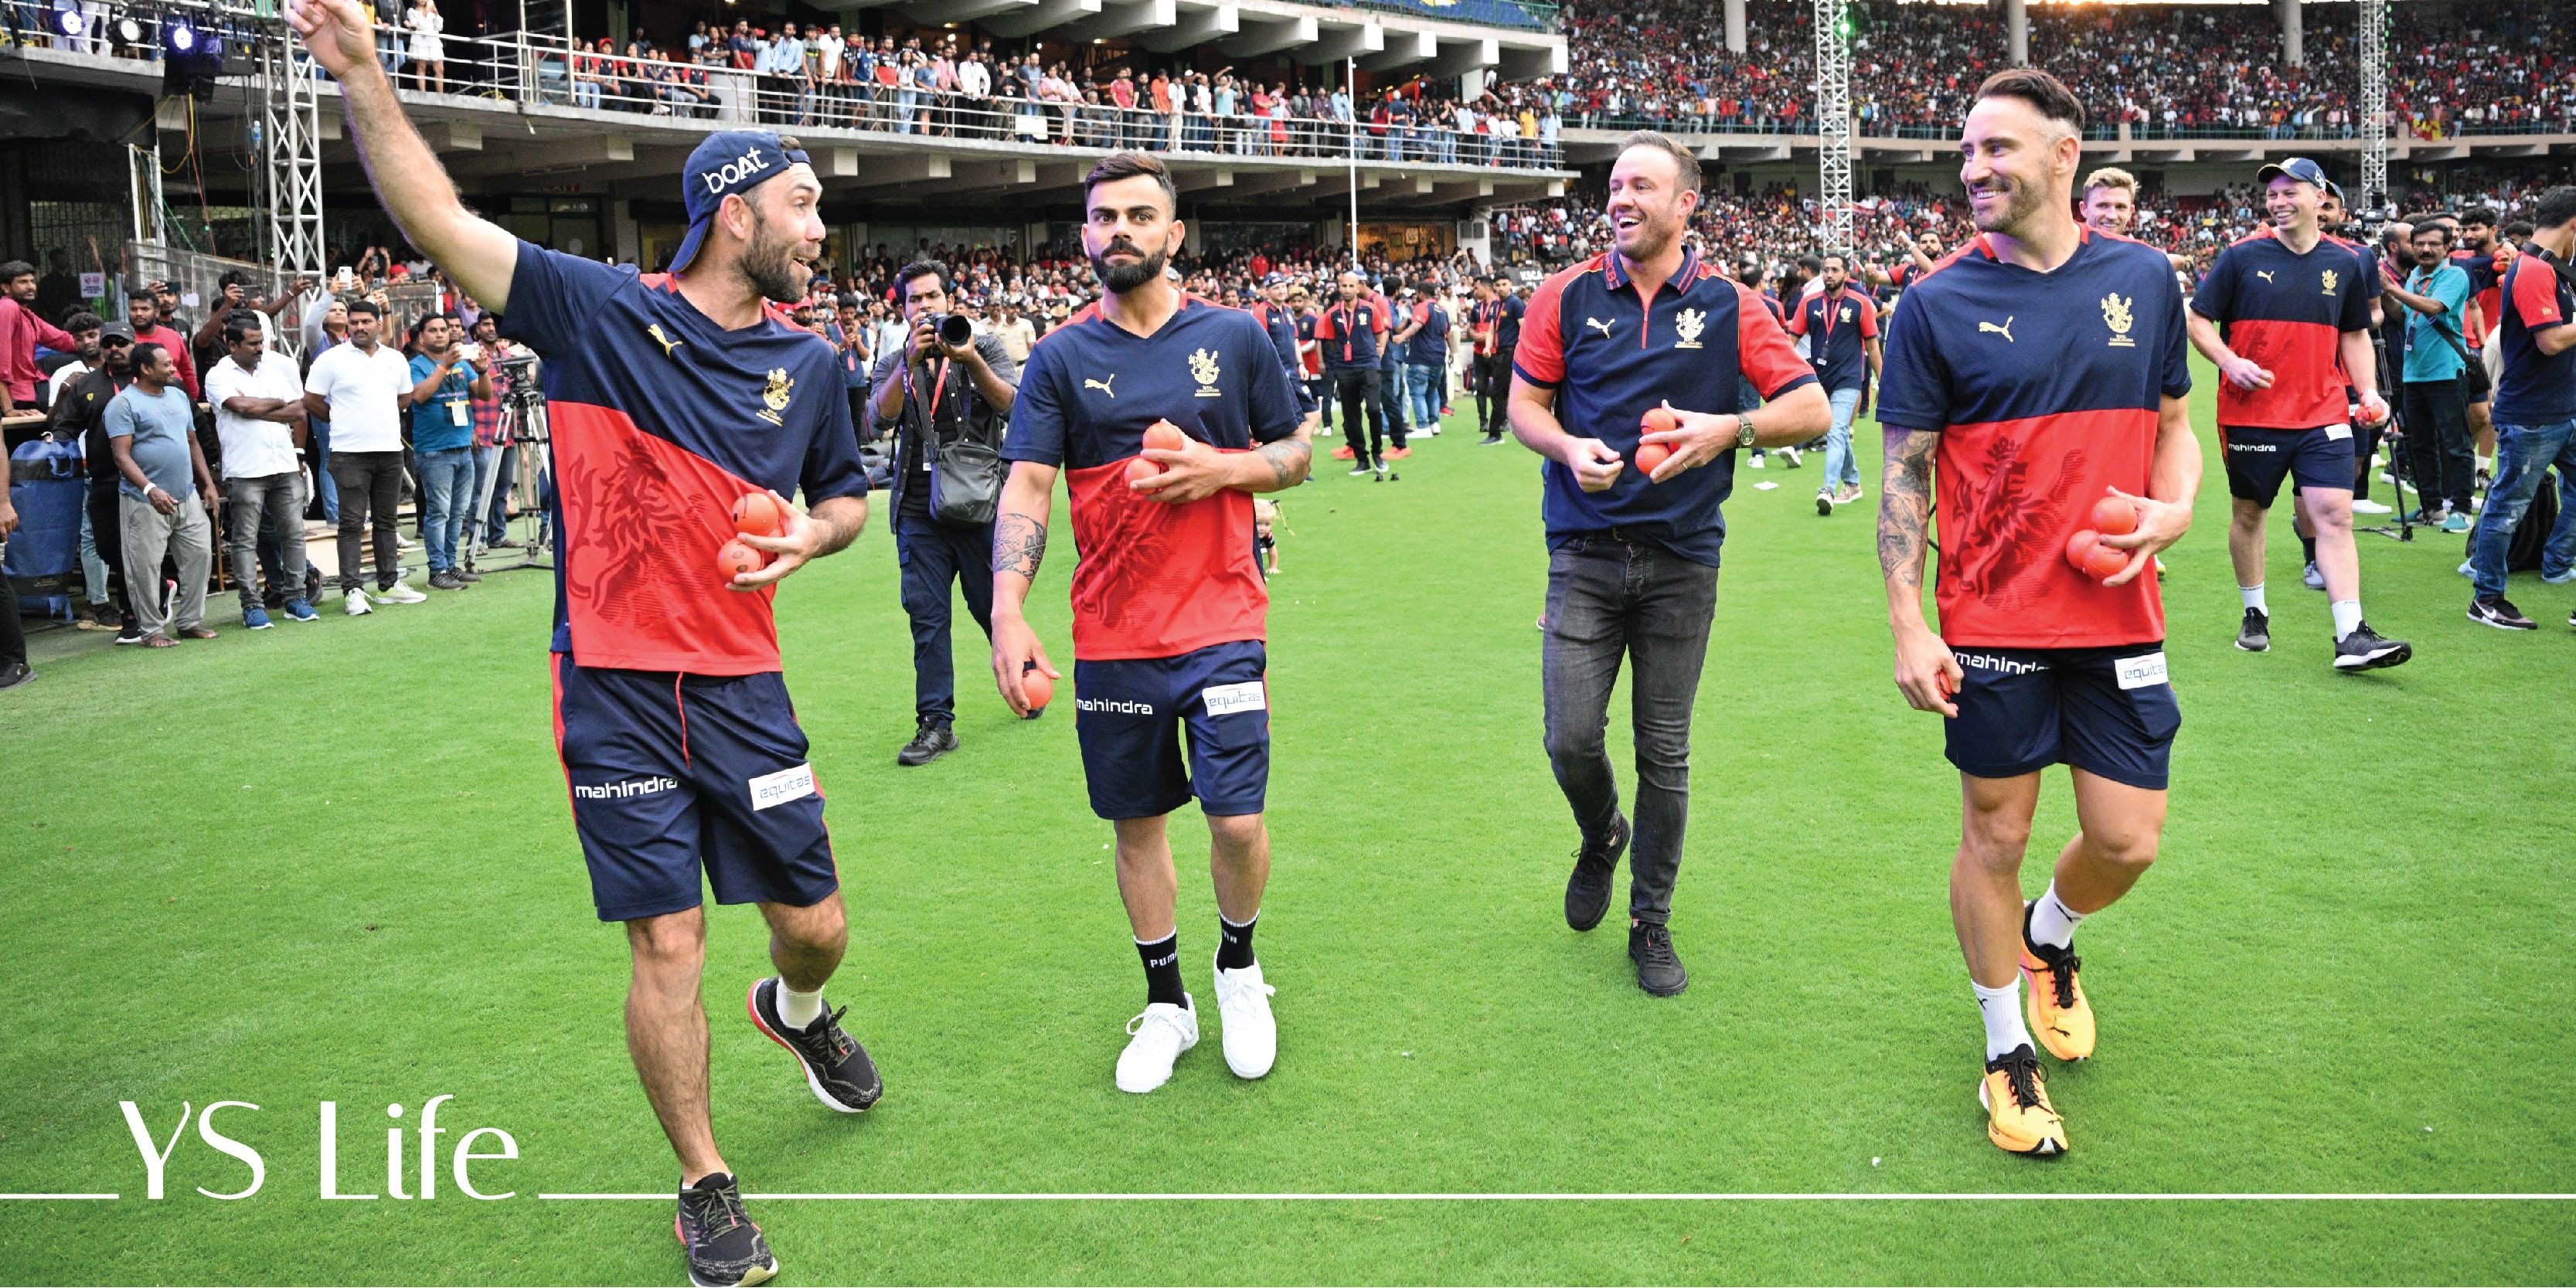 Ahead of IPL, RCB’s homecoming was a catharsis for fans